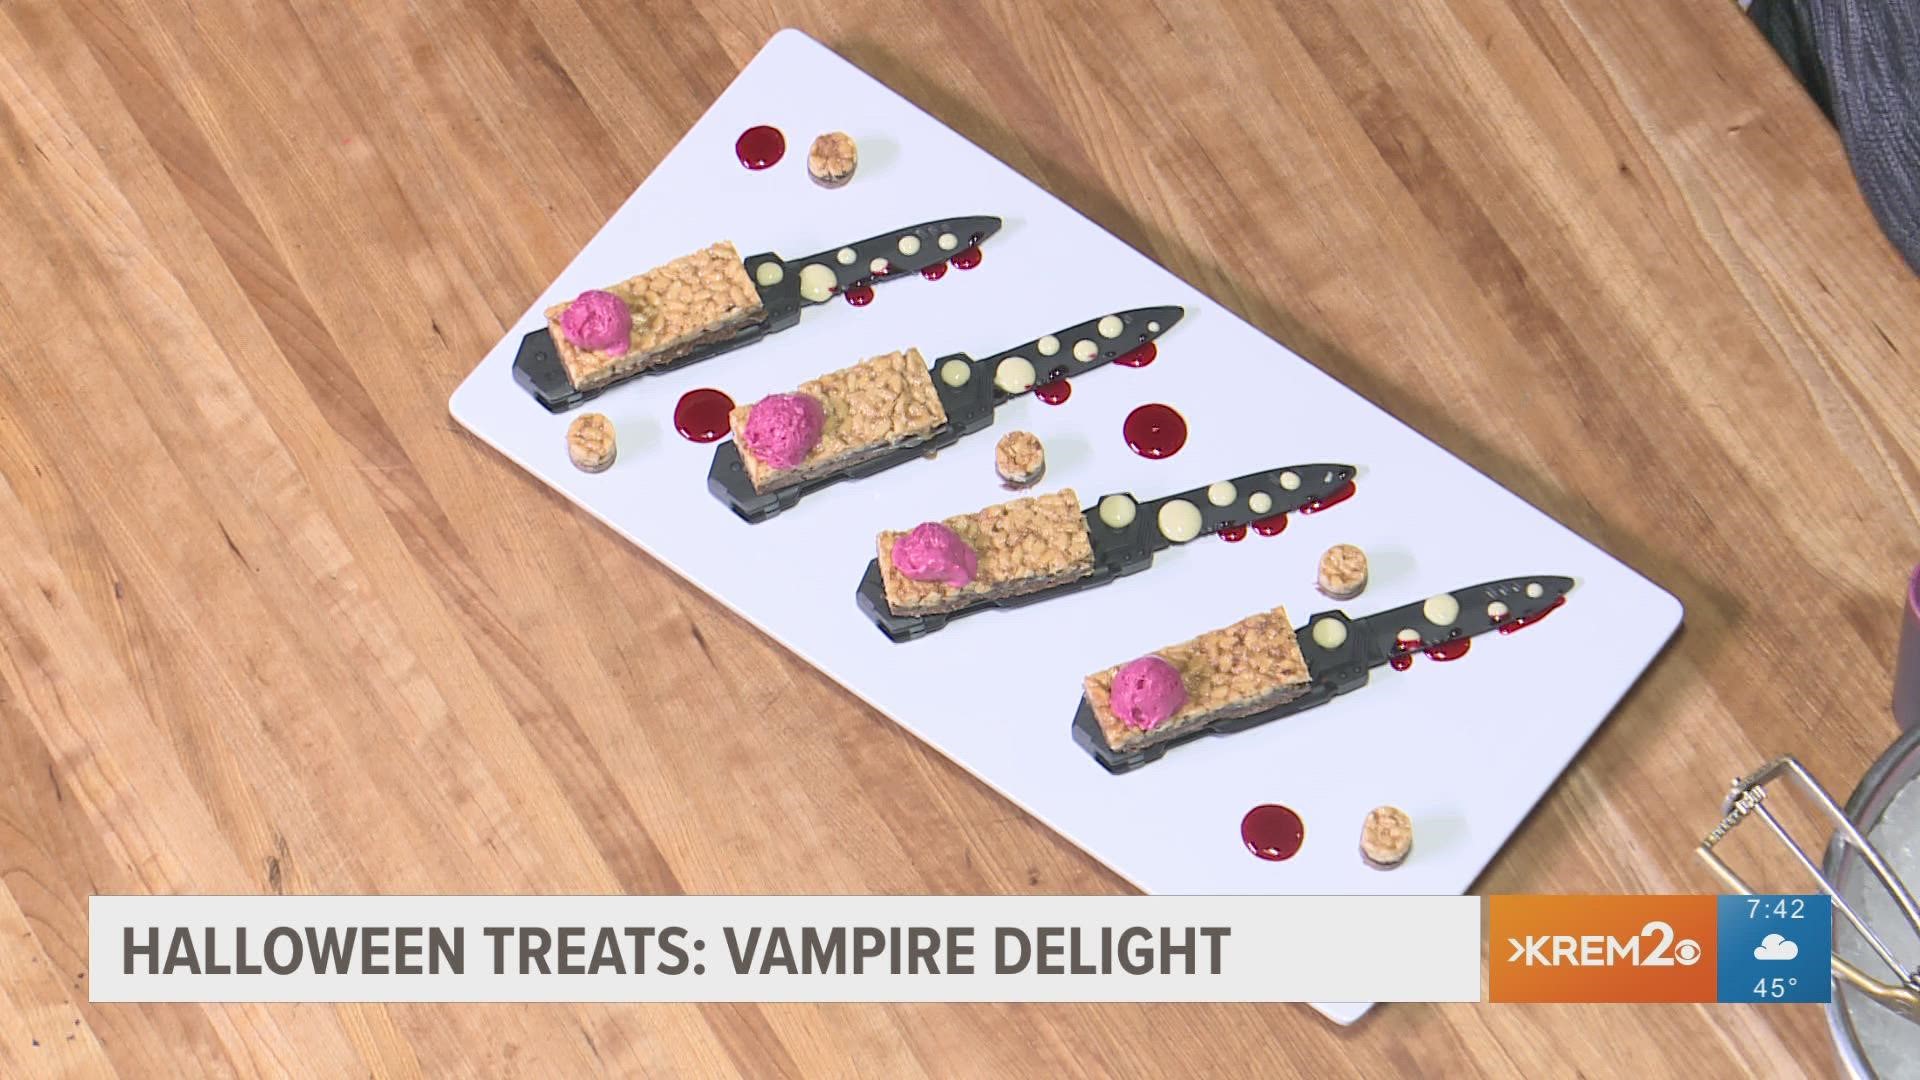 Pastry Chef Kristina Stephenson from Northern Quest Resort & Casino shows us some Halloween treats.